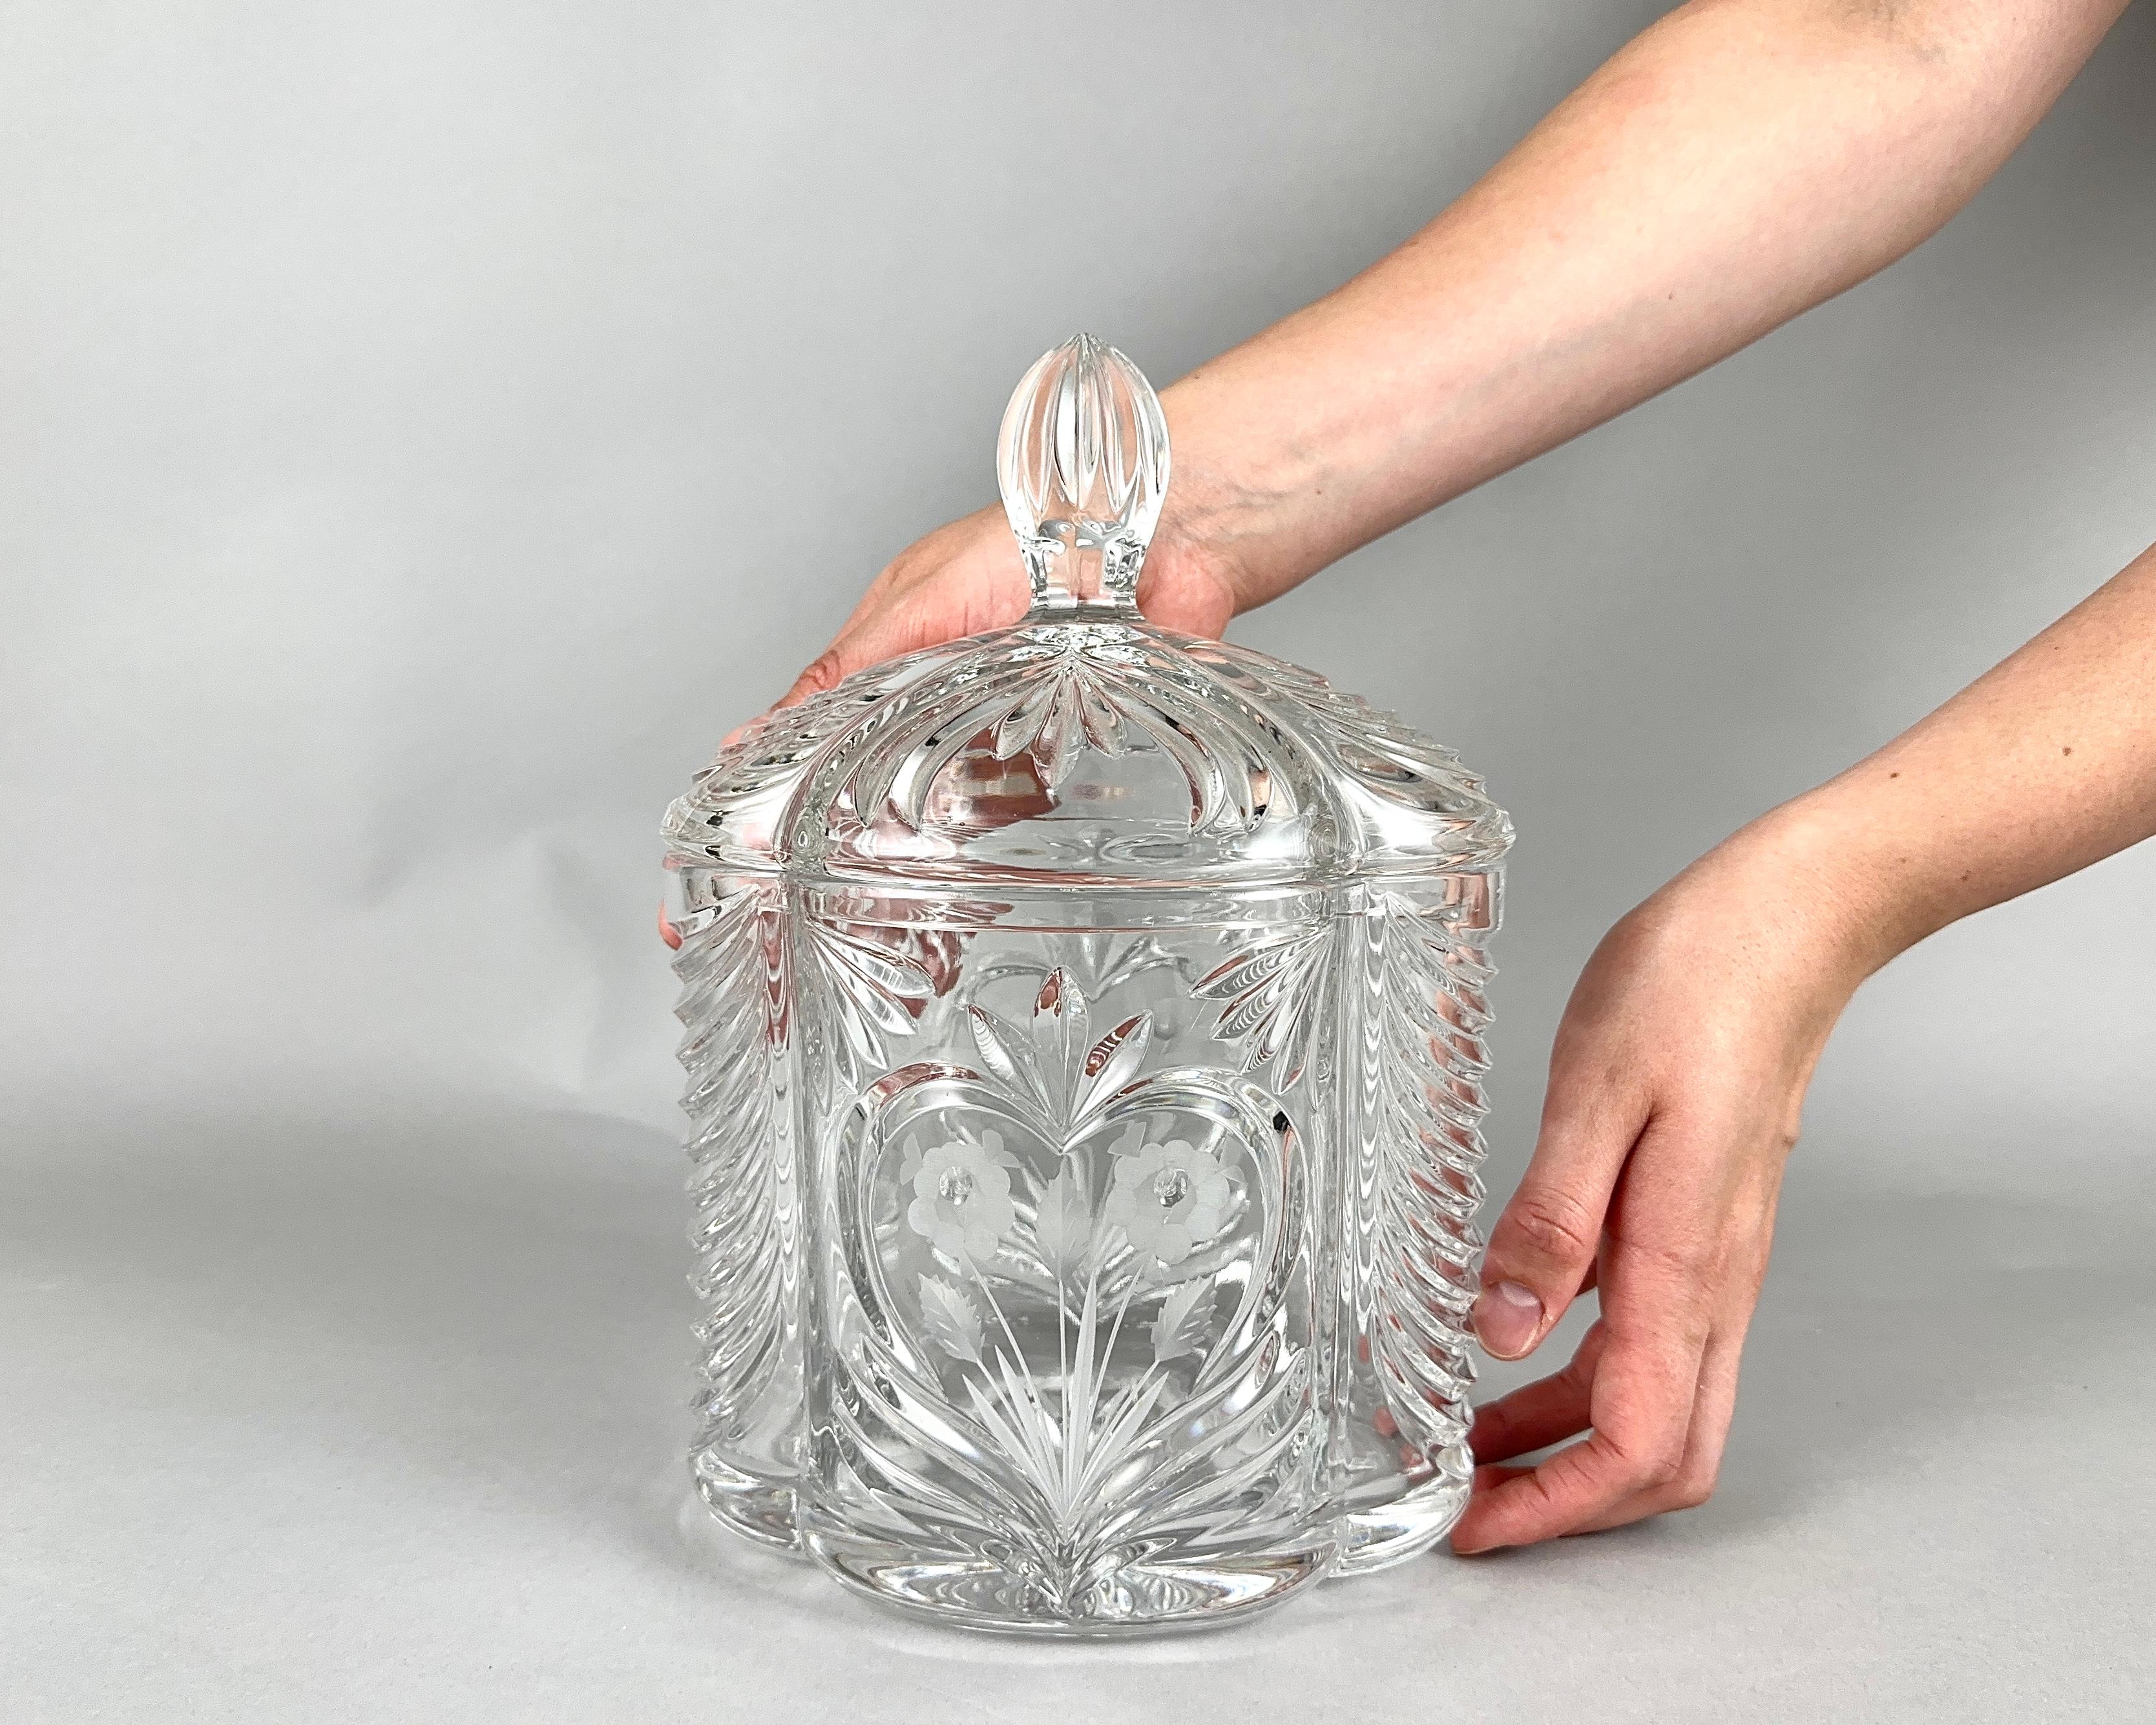 Vintage Crystal jar with a lid, you can store jewelry, sweets, household items in it.

In ancient times, bonbonnieres were made of silver, brass and copper. And they were intended, as they are today, to store sweets or cookies.

But thanks to modern